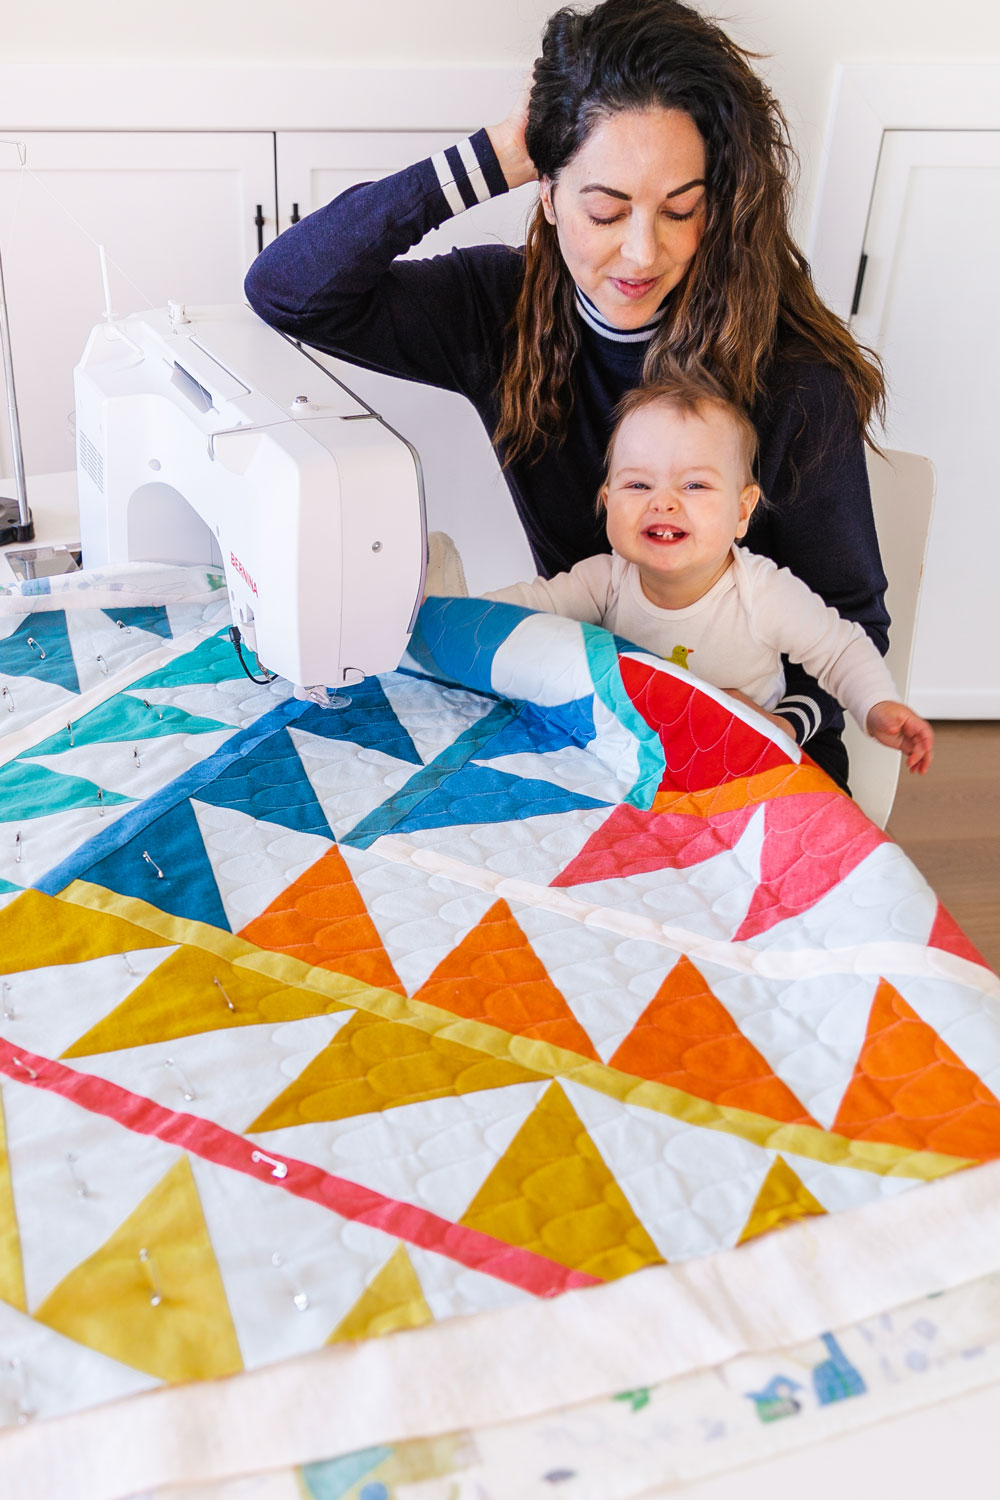 This simple free motion quilting tutorial will show you how easy and FUN free motion quilting can be! With just a few tools, and some practice, you will be a FMQ rockstar and able to quilt this adorable scallops motif just like me! suzyquilts.com #fmq #quilting